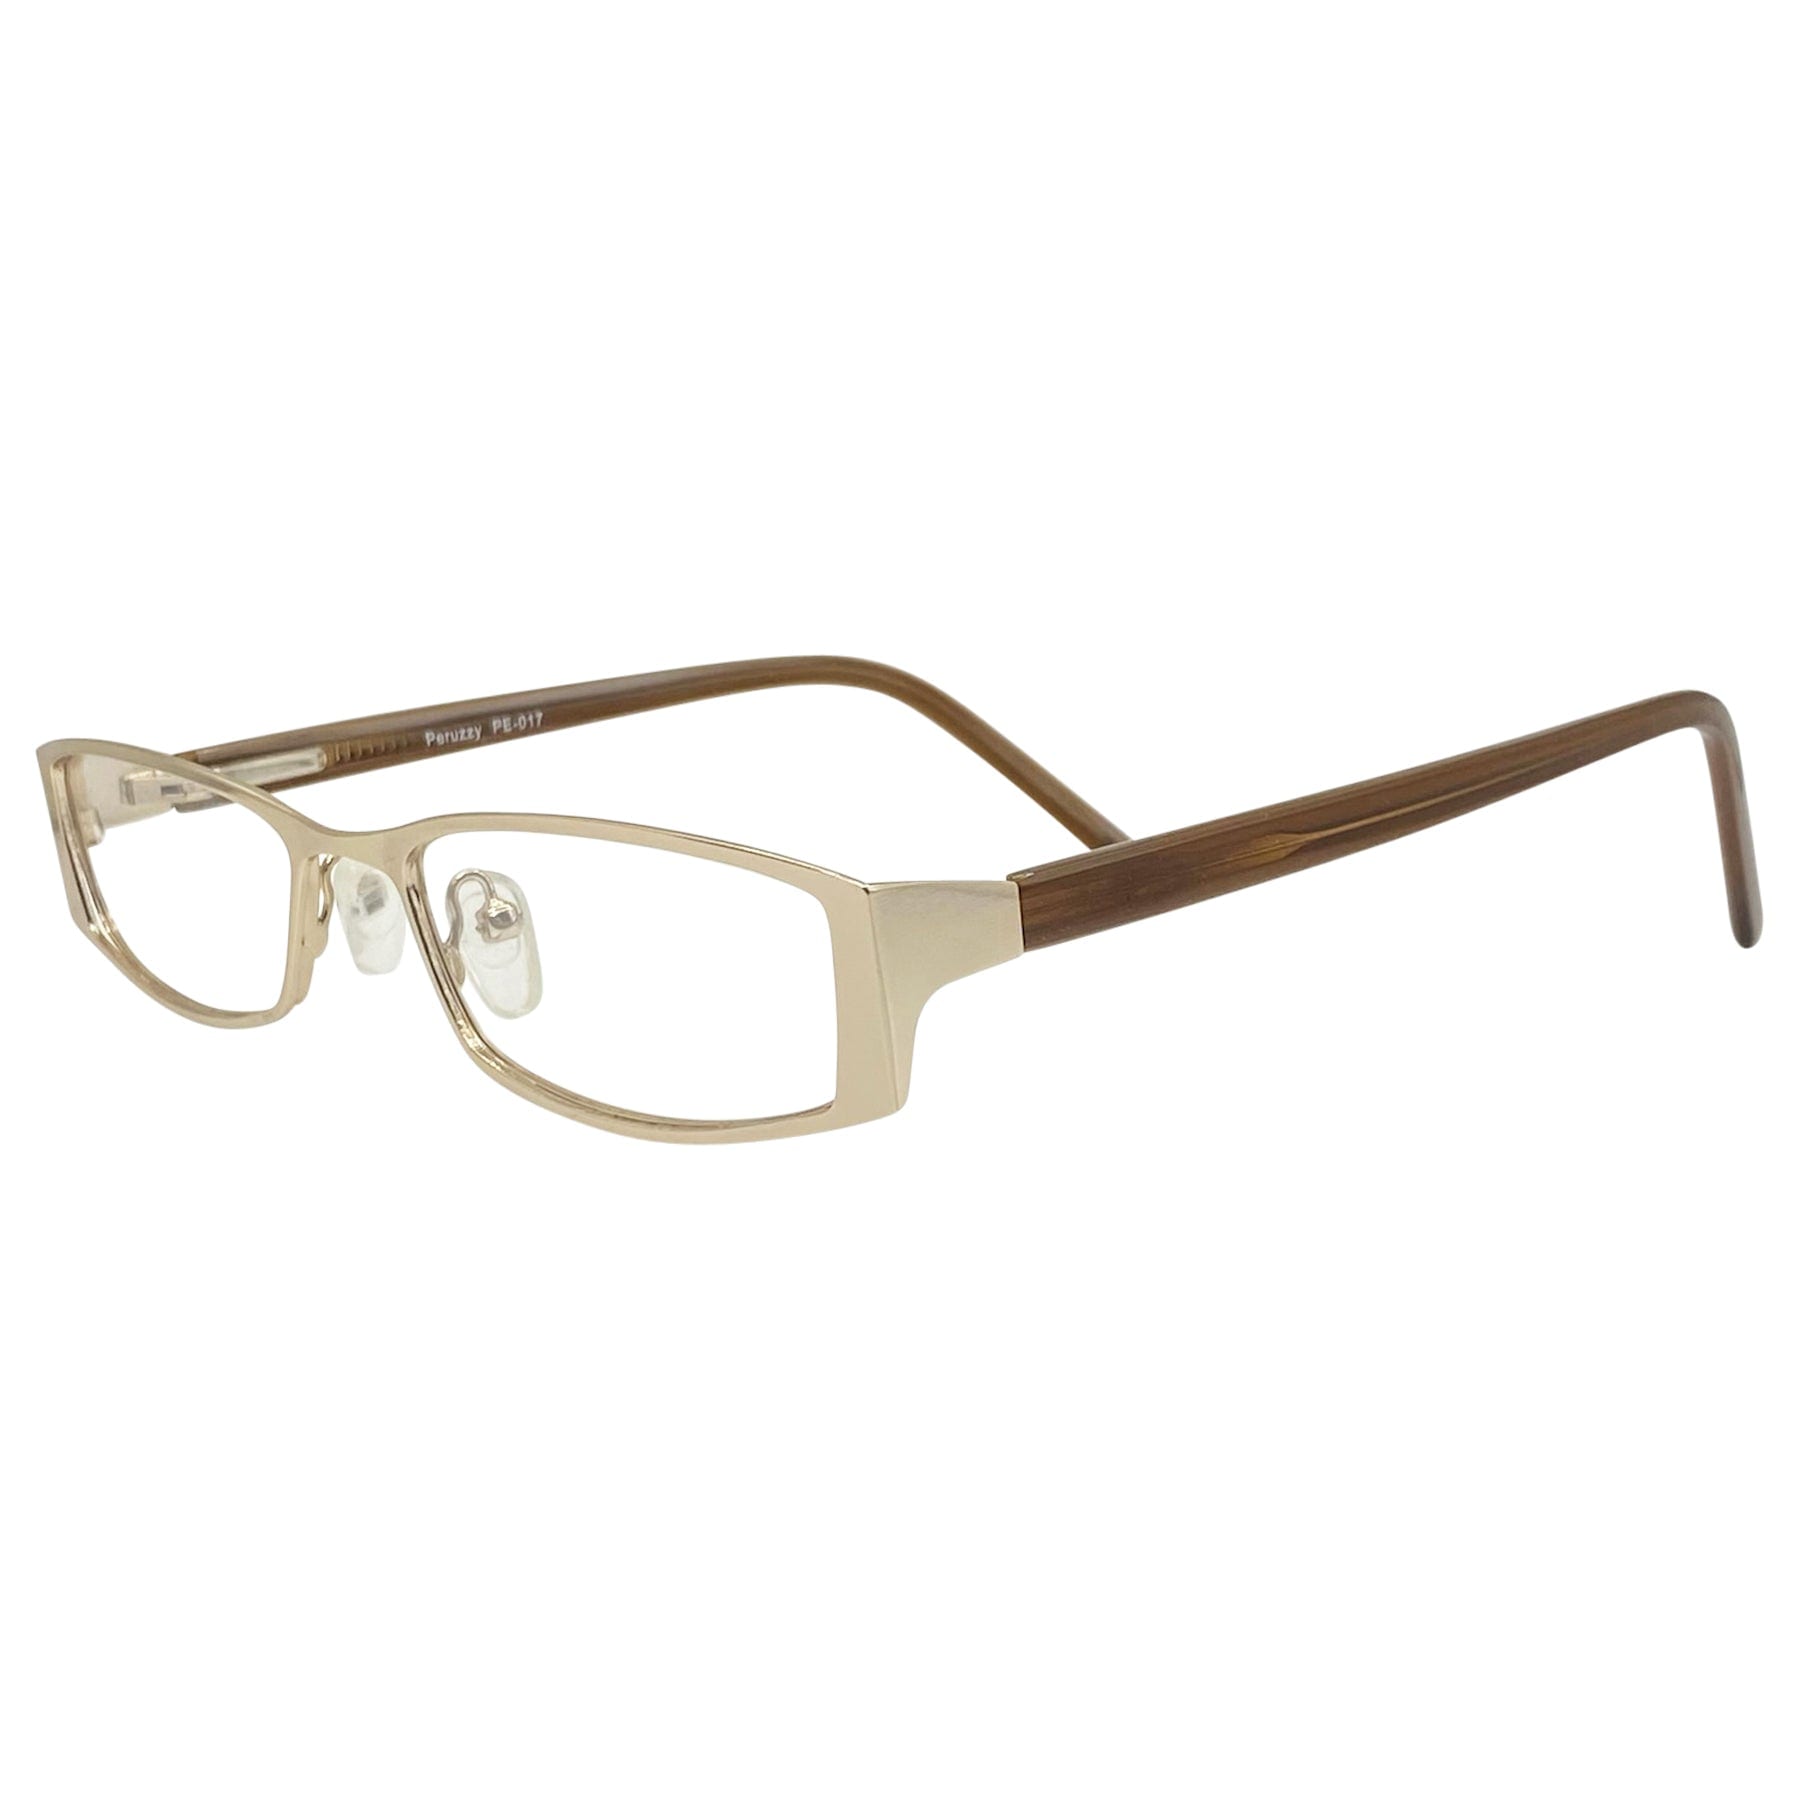 clear glasses women with a 90s style and gold metal frame